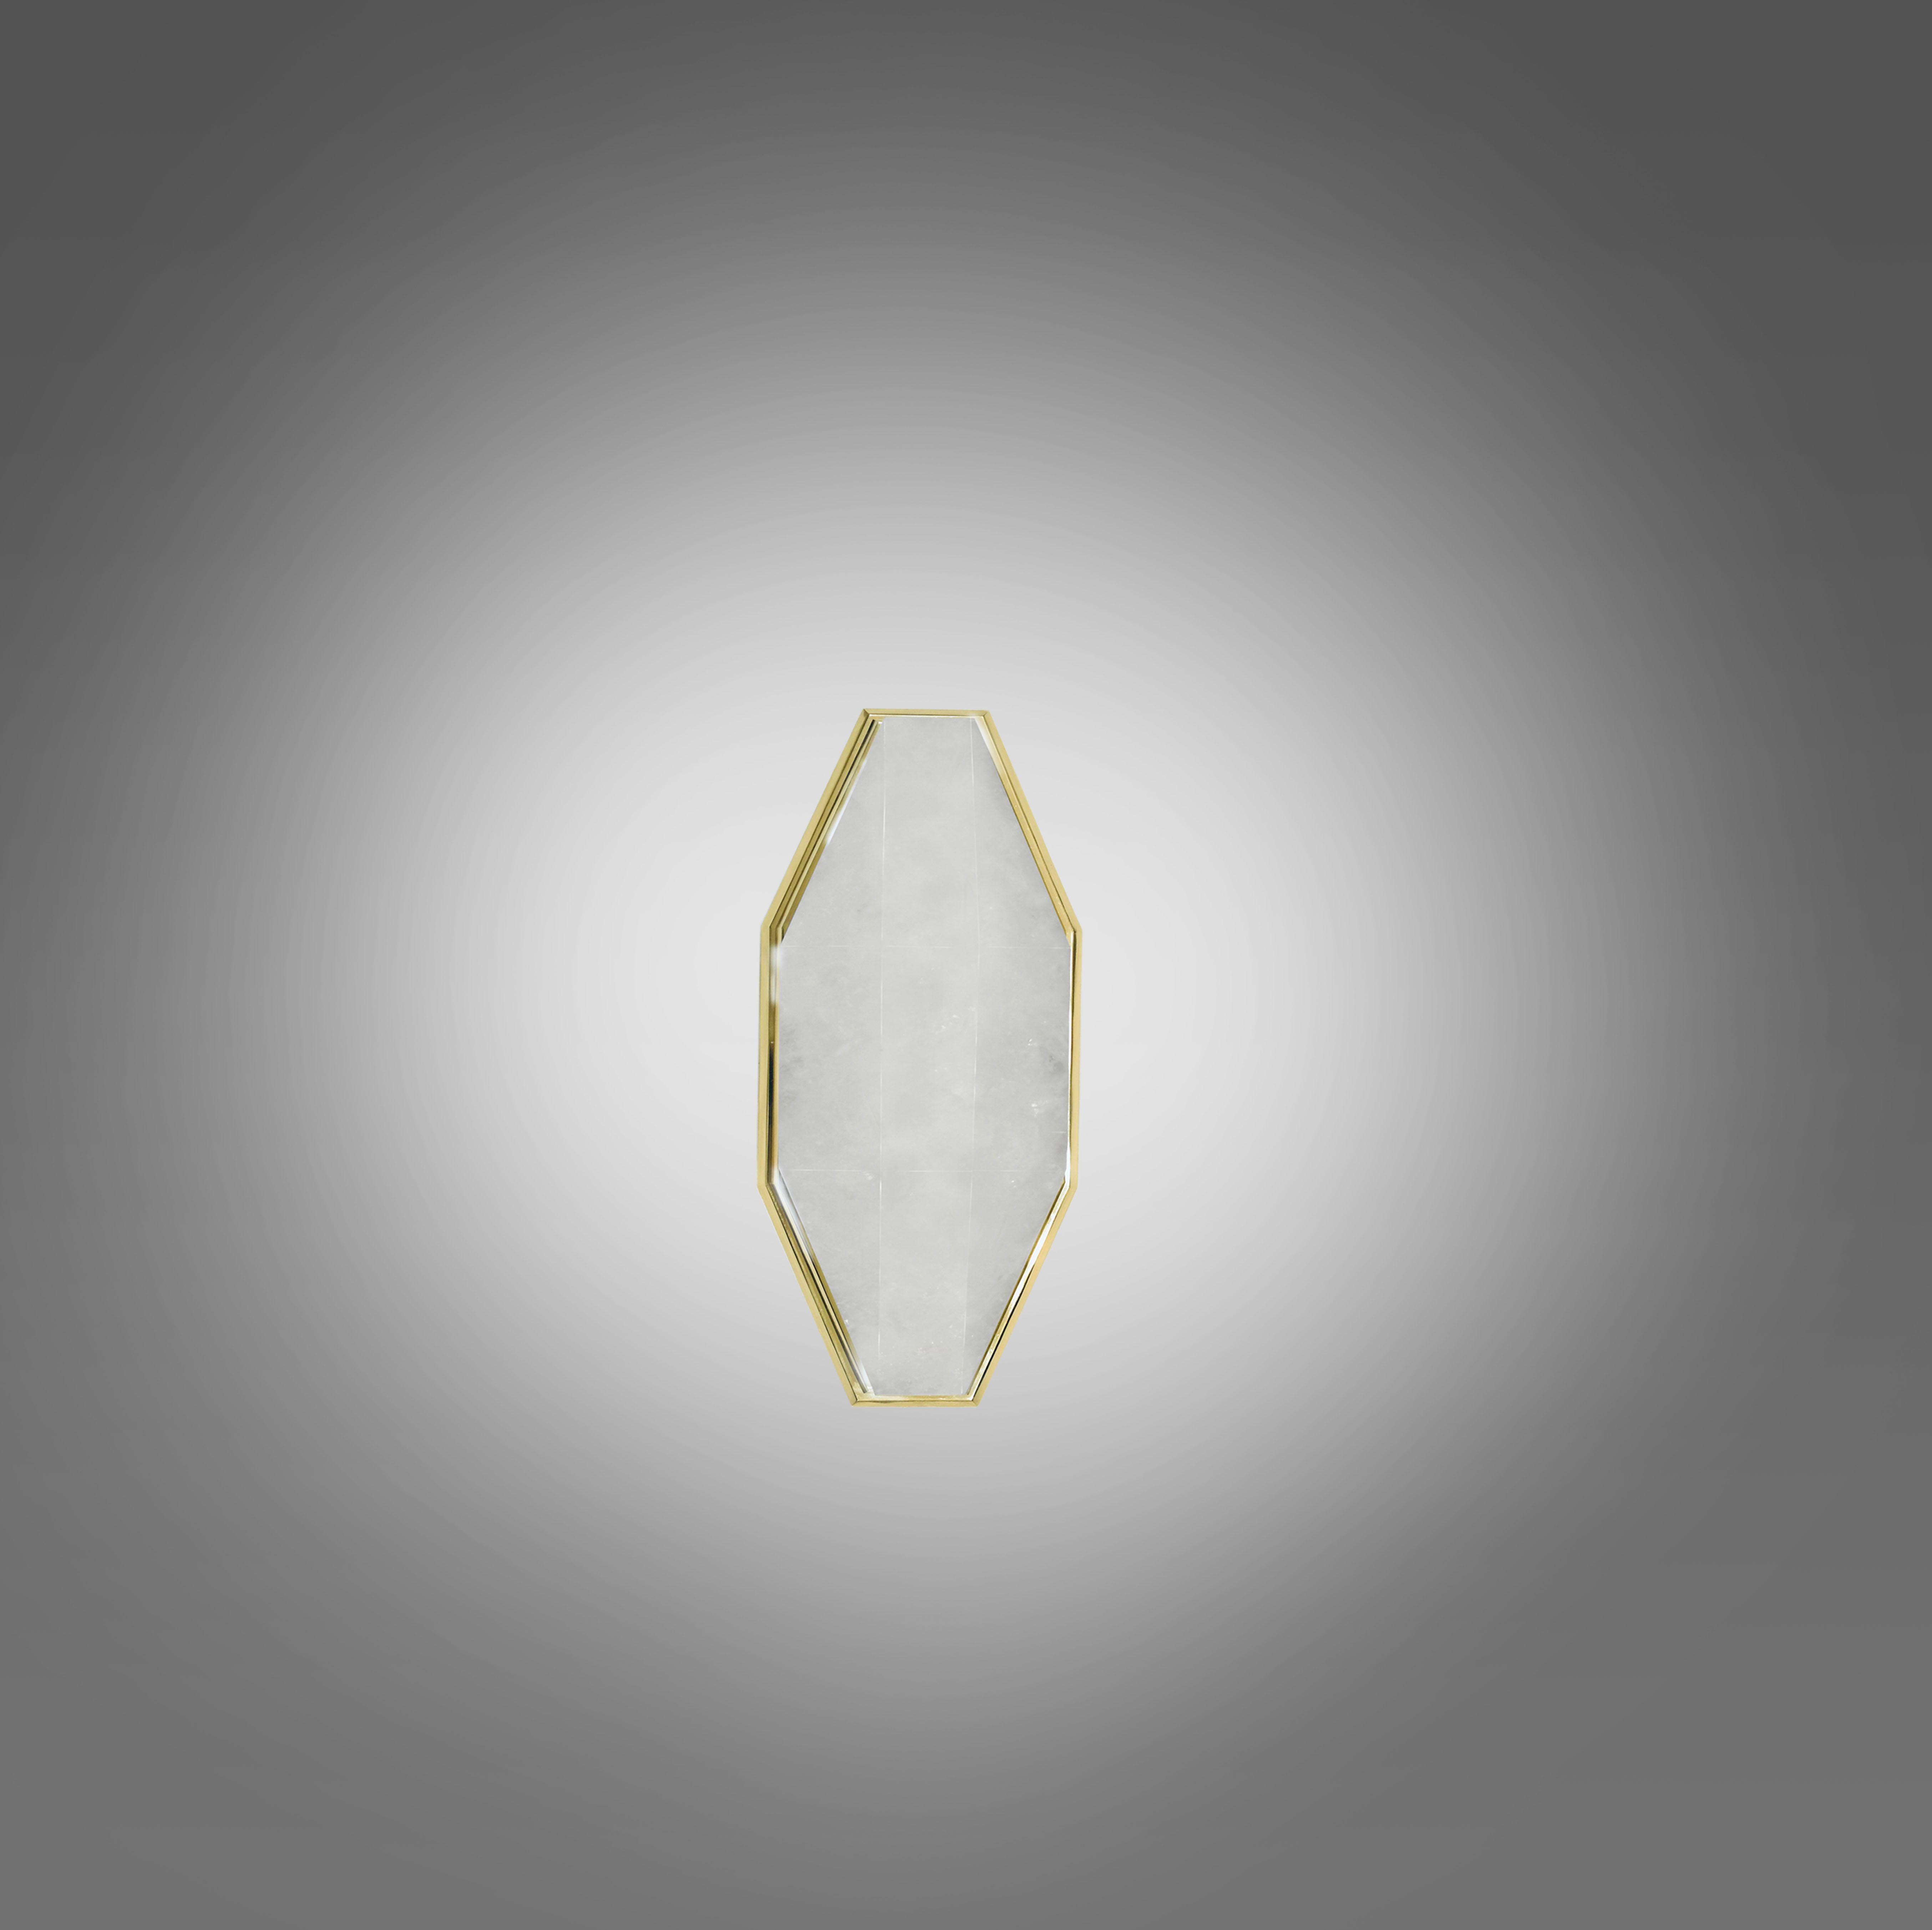 PBW Rock Crystal Sconces by Phoenix In Excellent Condition For Sale In New York, NY